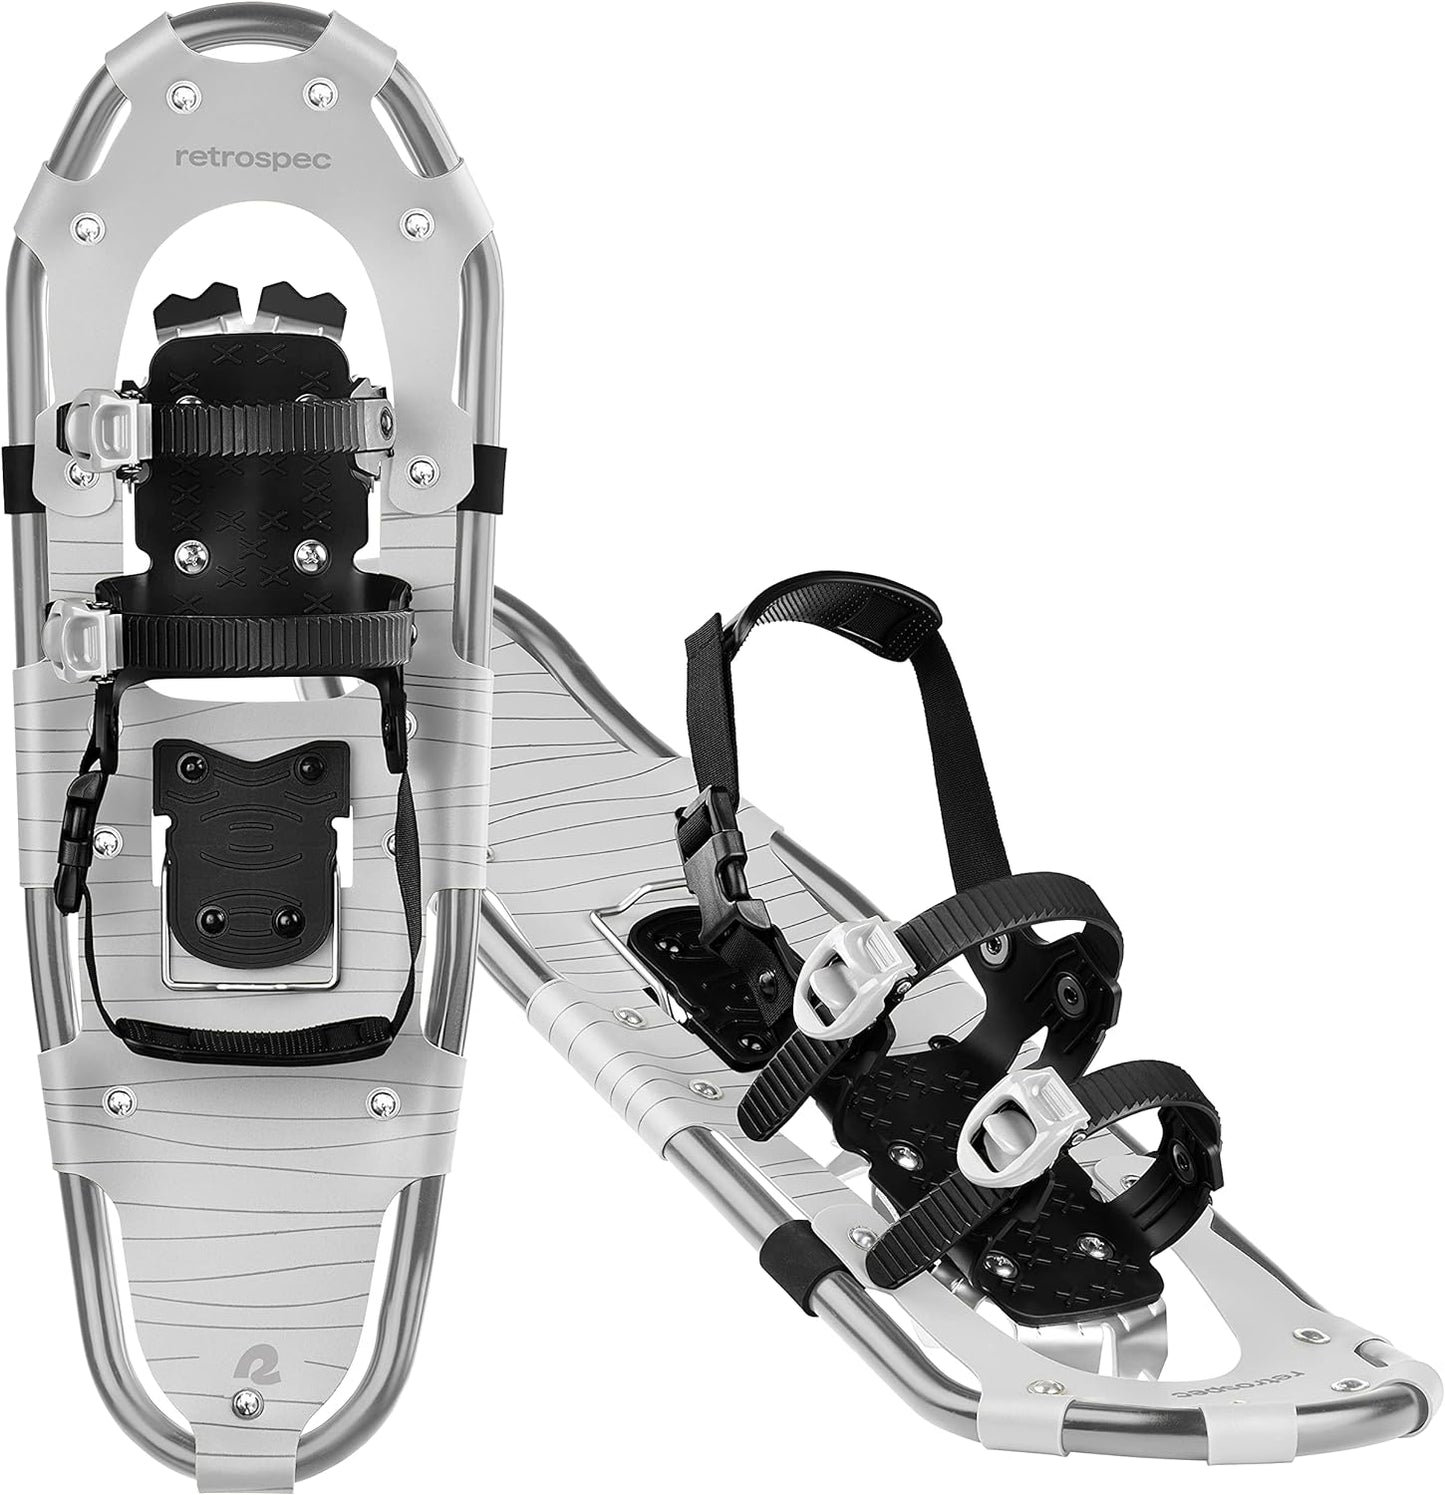 Retrospec Drifter 21/25/30 Inch Snowshoes & Trekking Poles Bundle for Men, Women, and Youth - Durable All Terrain with Adjustable Binding, Carry Bag and Lightweight Aluminum Walking & Hiking Poles